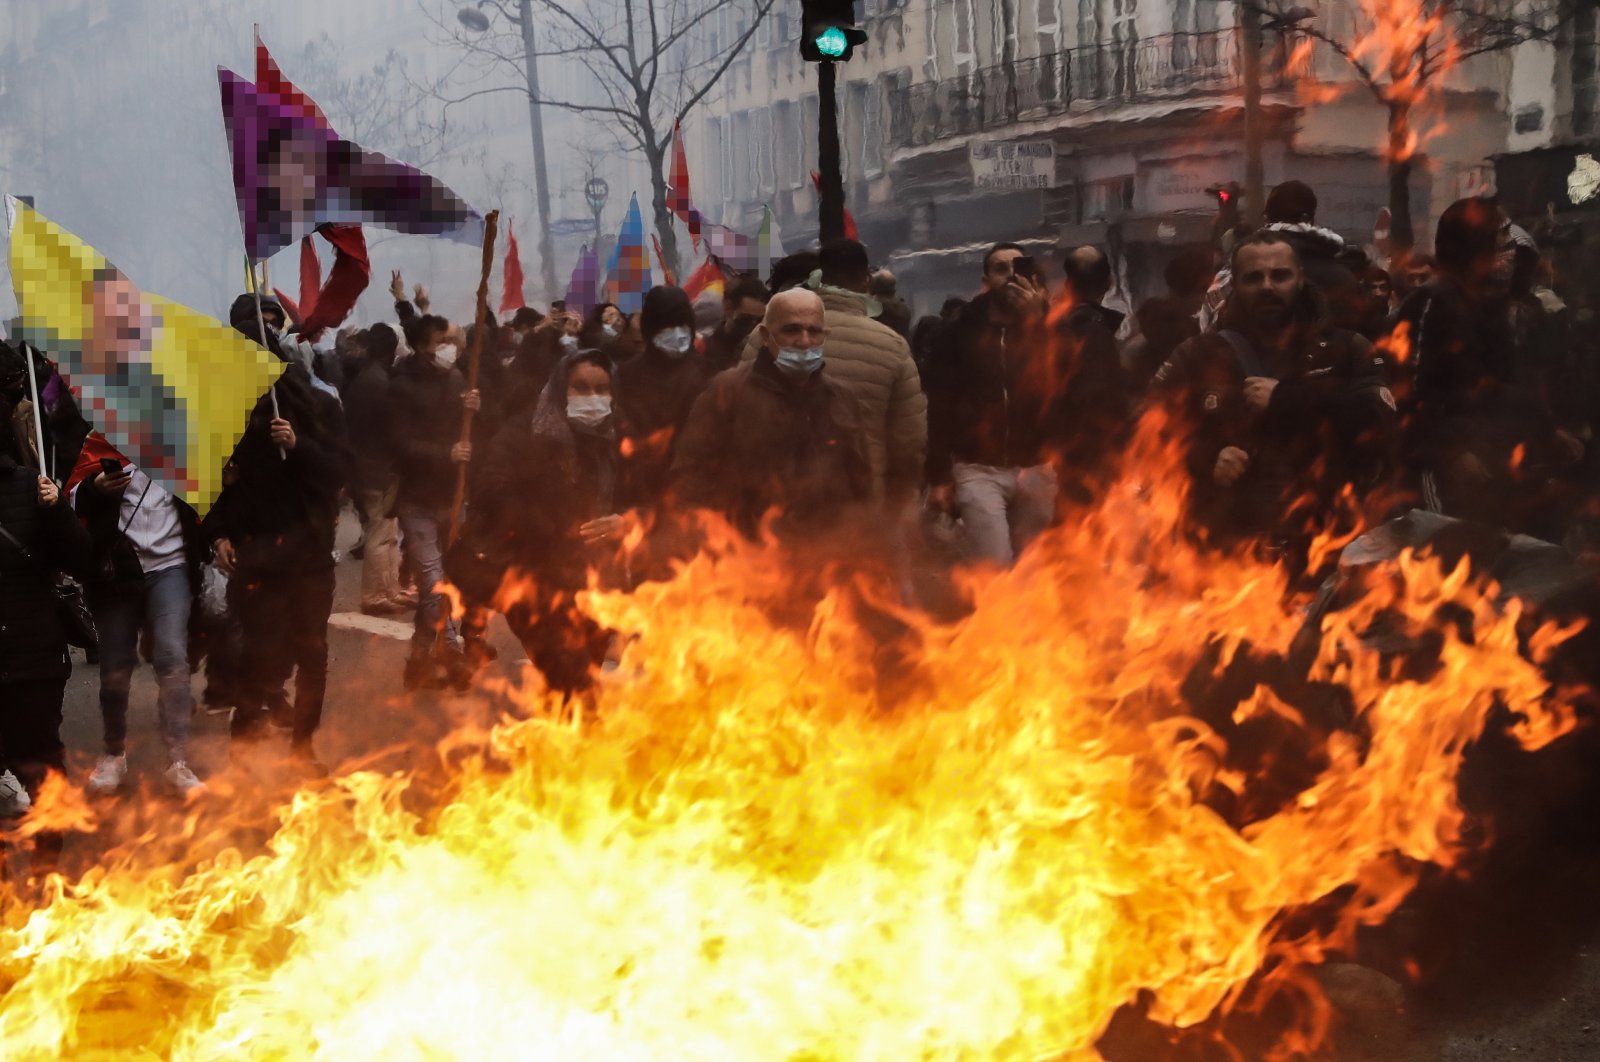 PKK supporters attack civilian cars and set streets on fire in Paris, France, Dec. 24, 2022. (EPA Photo)